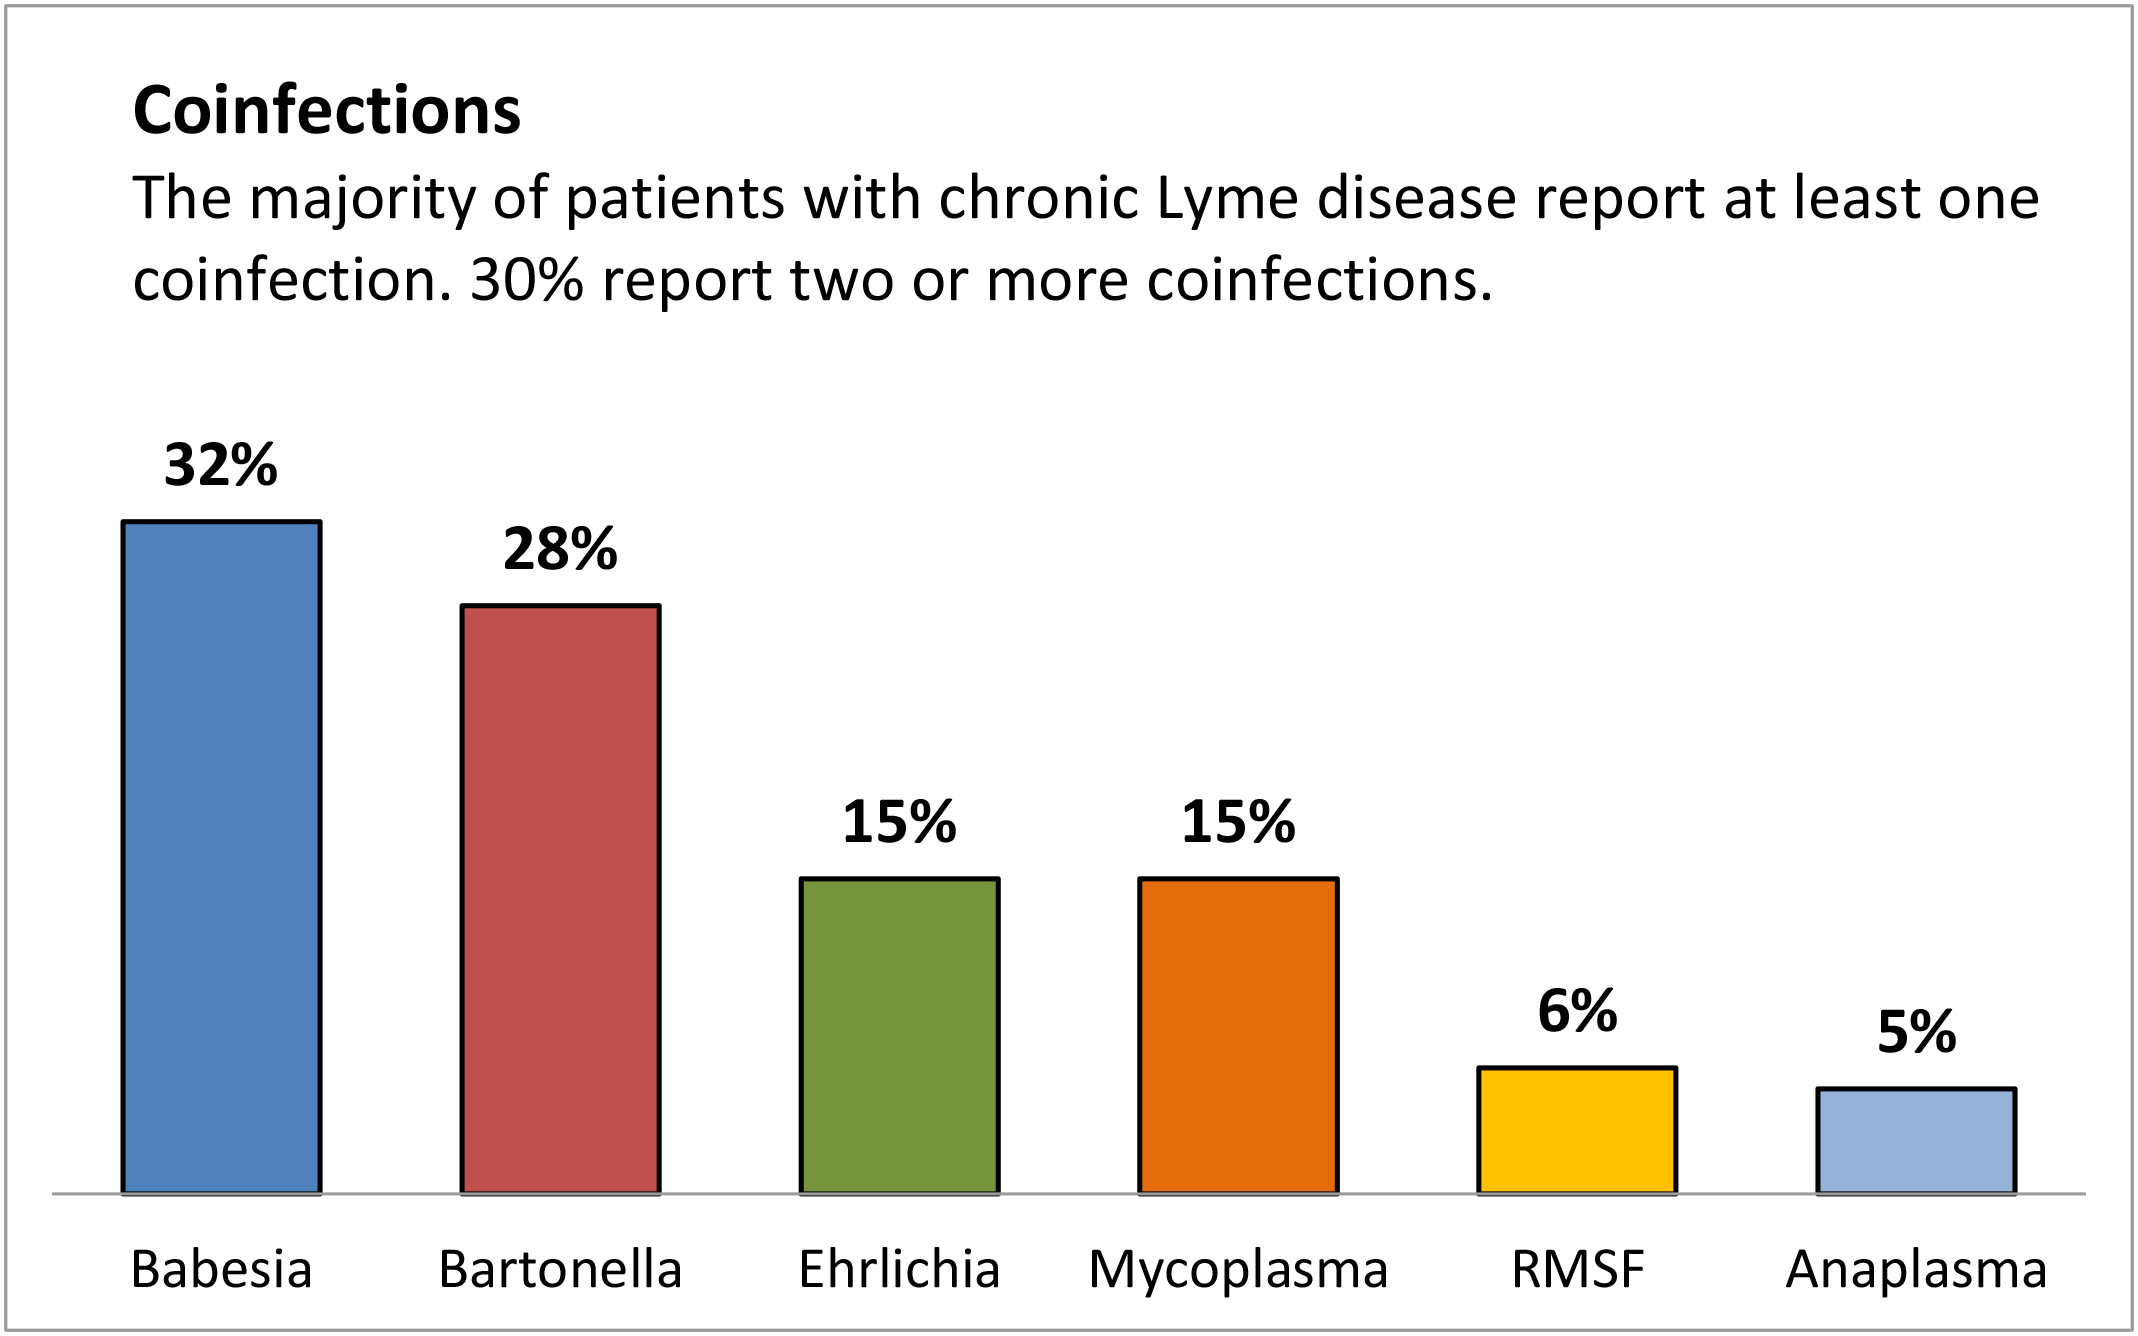 rate of co-infections in patients with Lyme disease